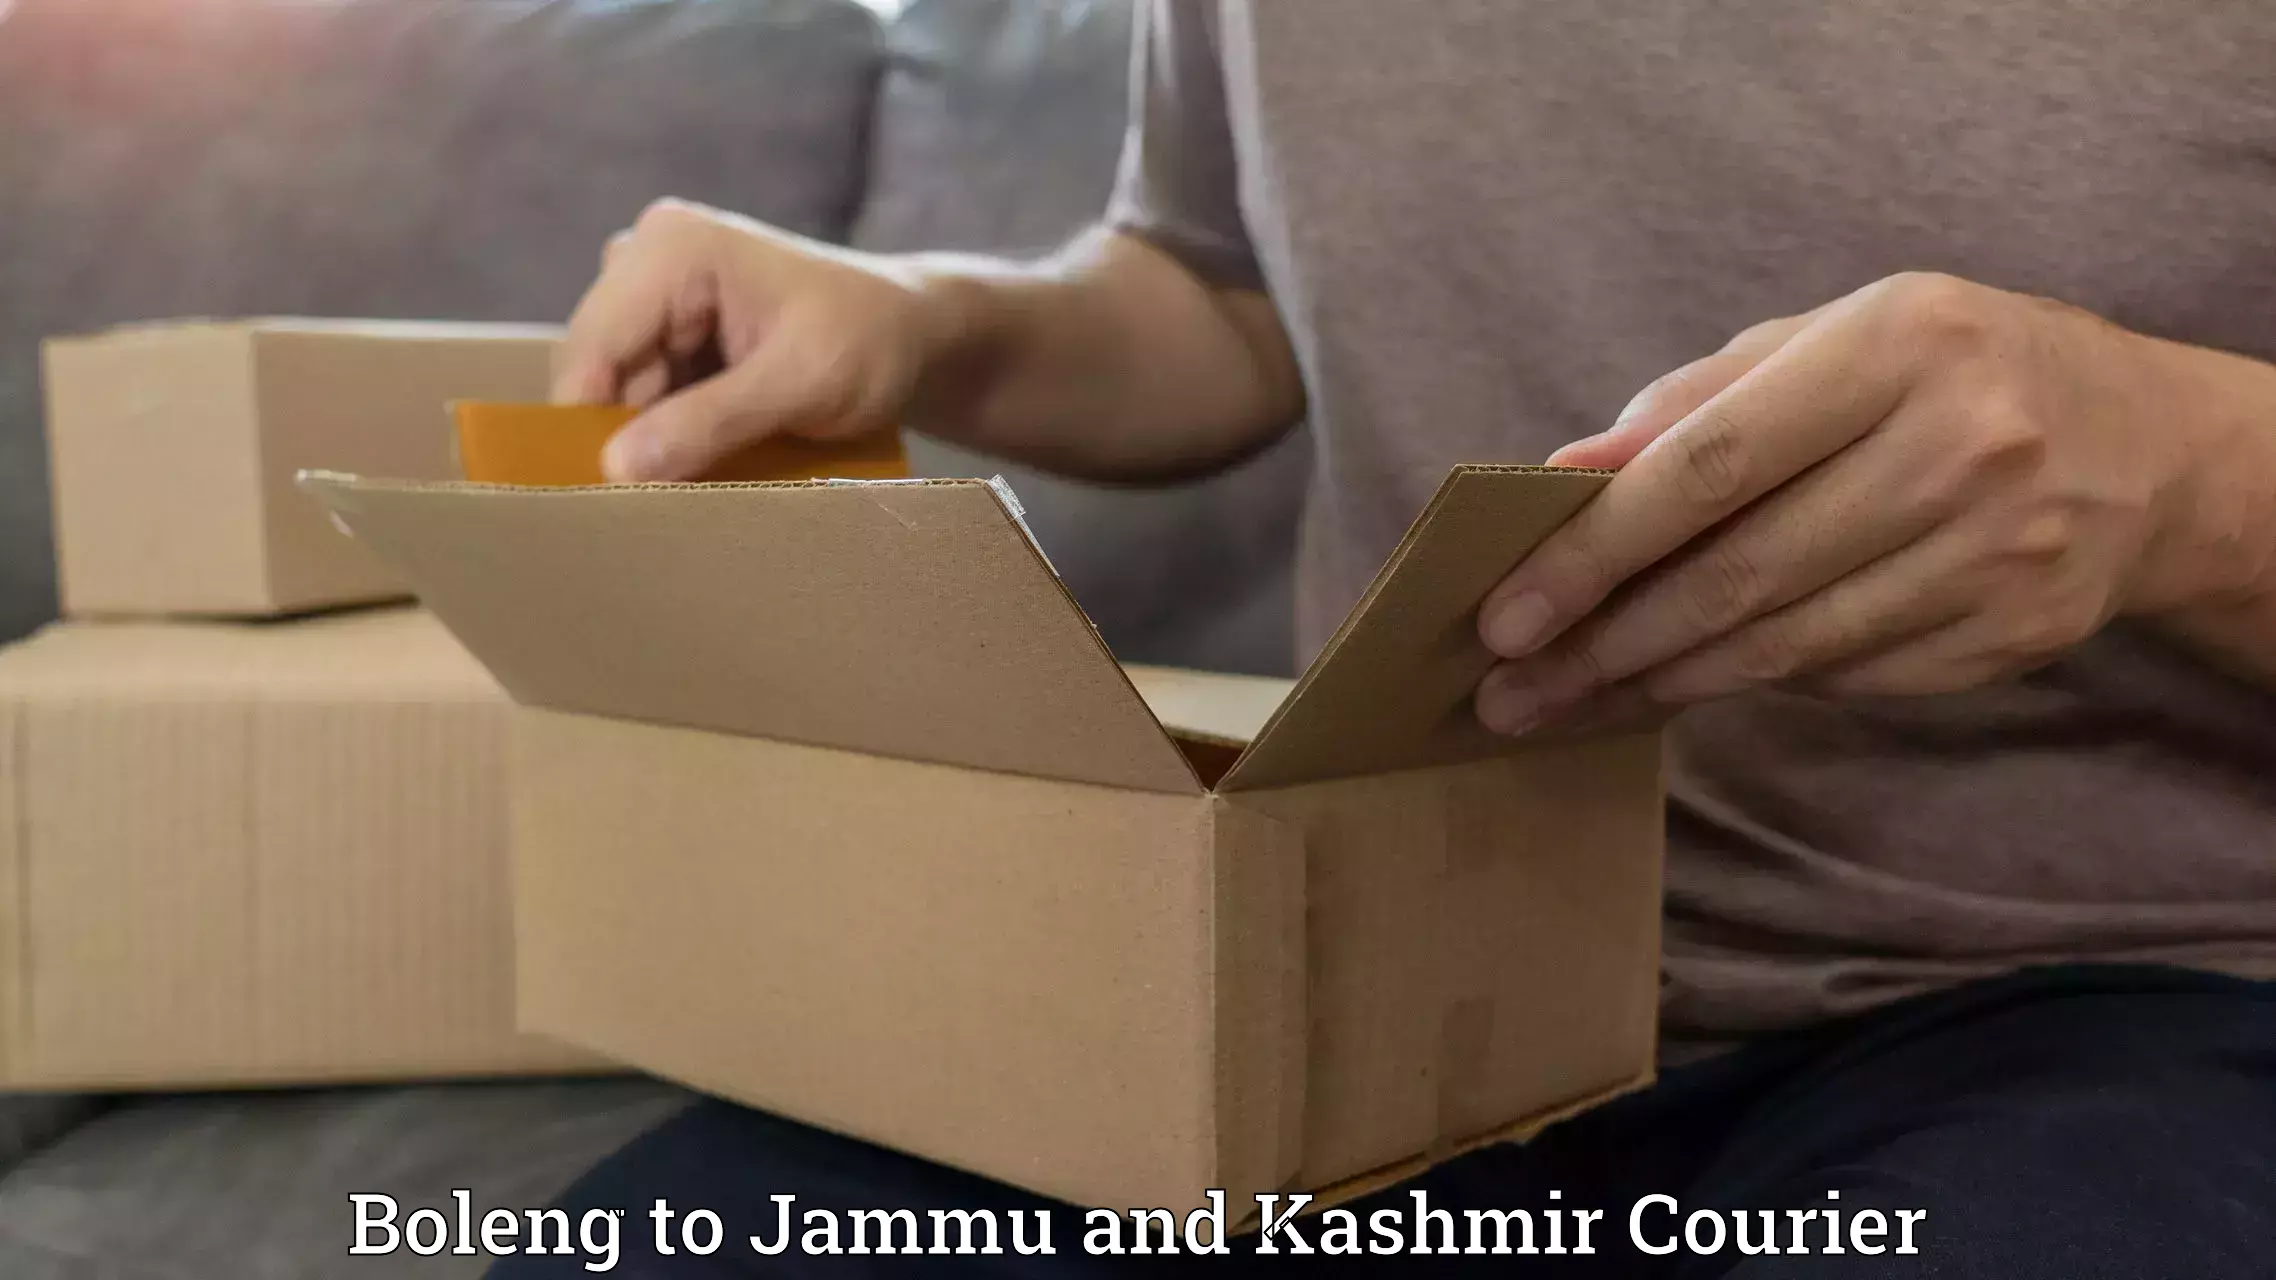 Package delivery network Boleng to Jammu